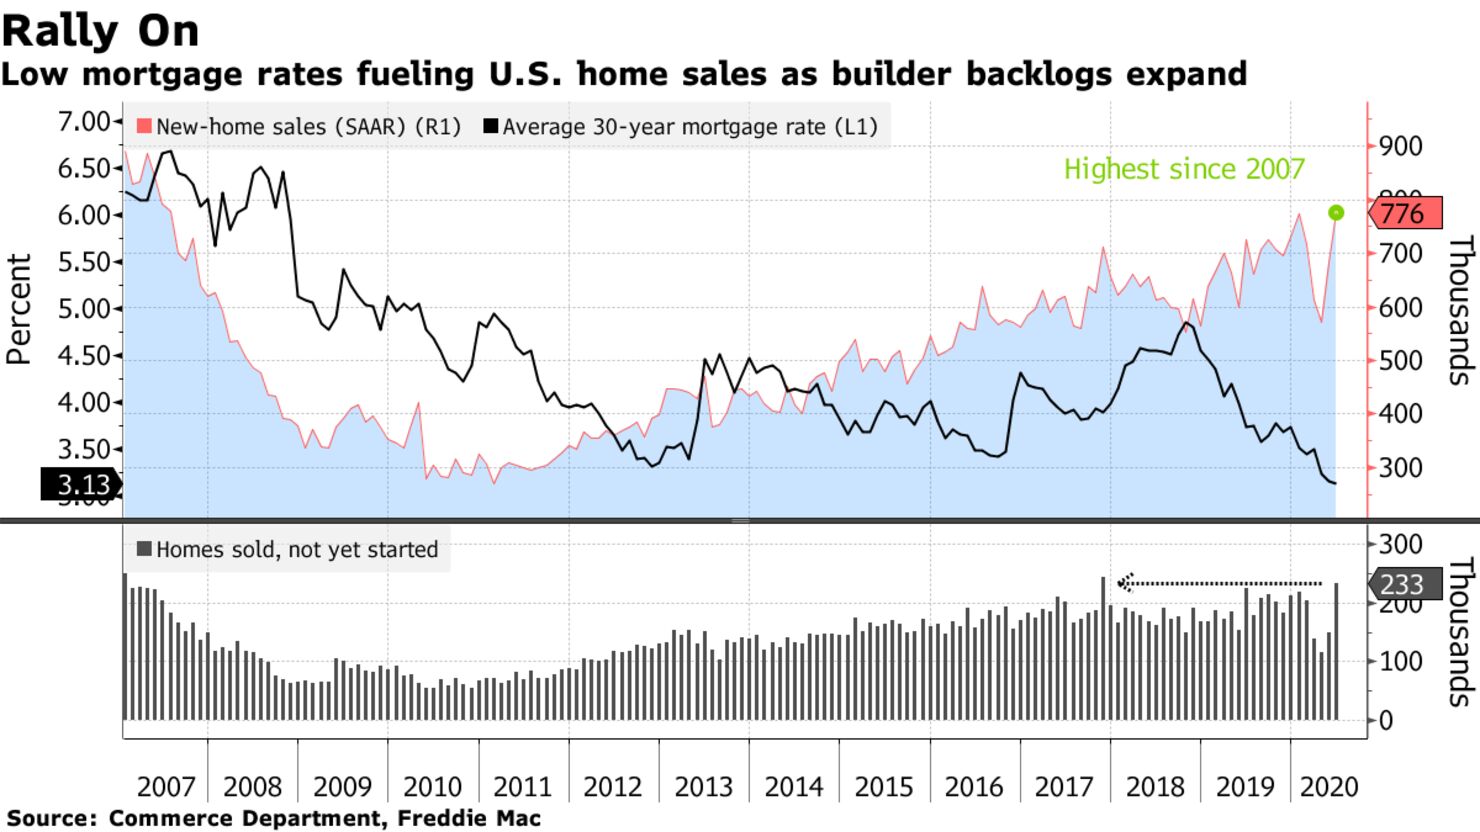 Low mortgage rates fueling U.S. home sales as builder backlogs expand